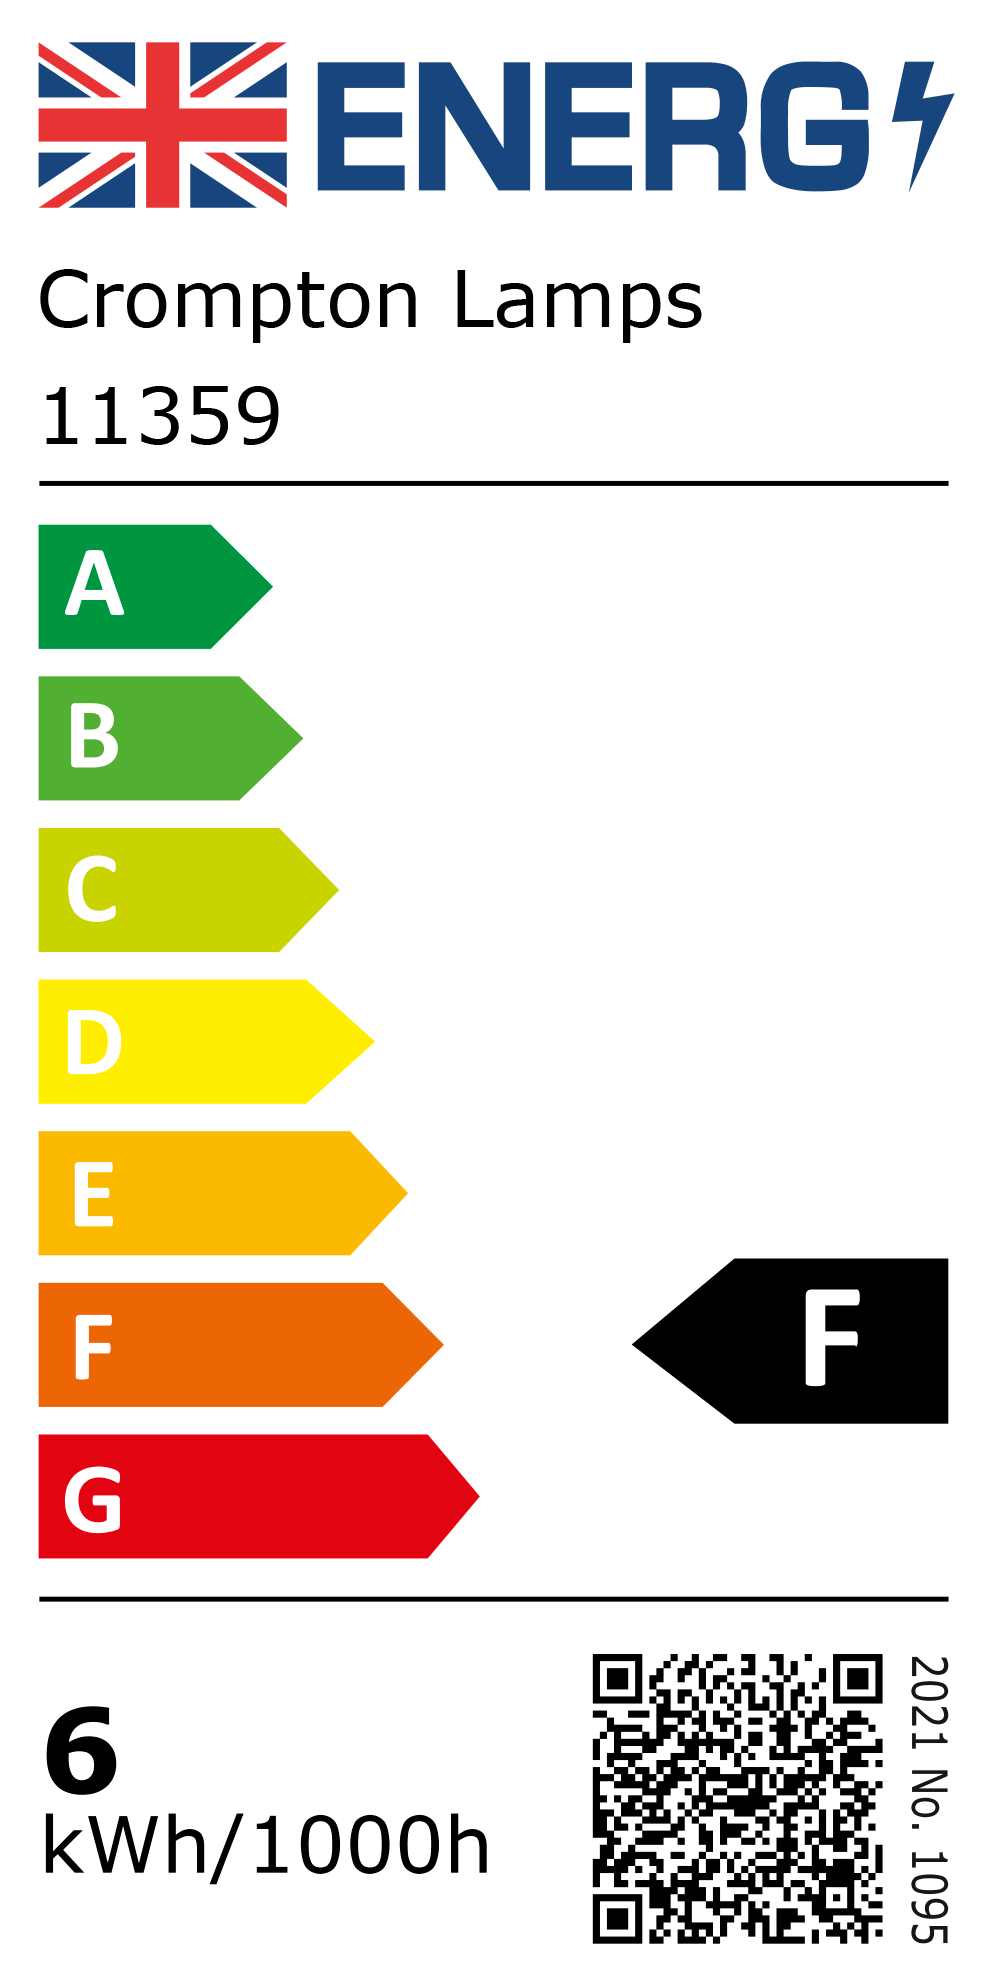 New 2021 Energy Rating Label: Stock Code 11359